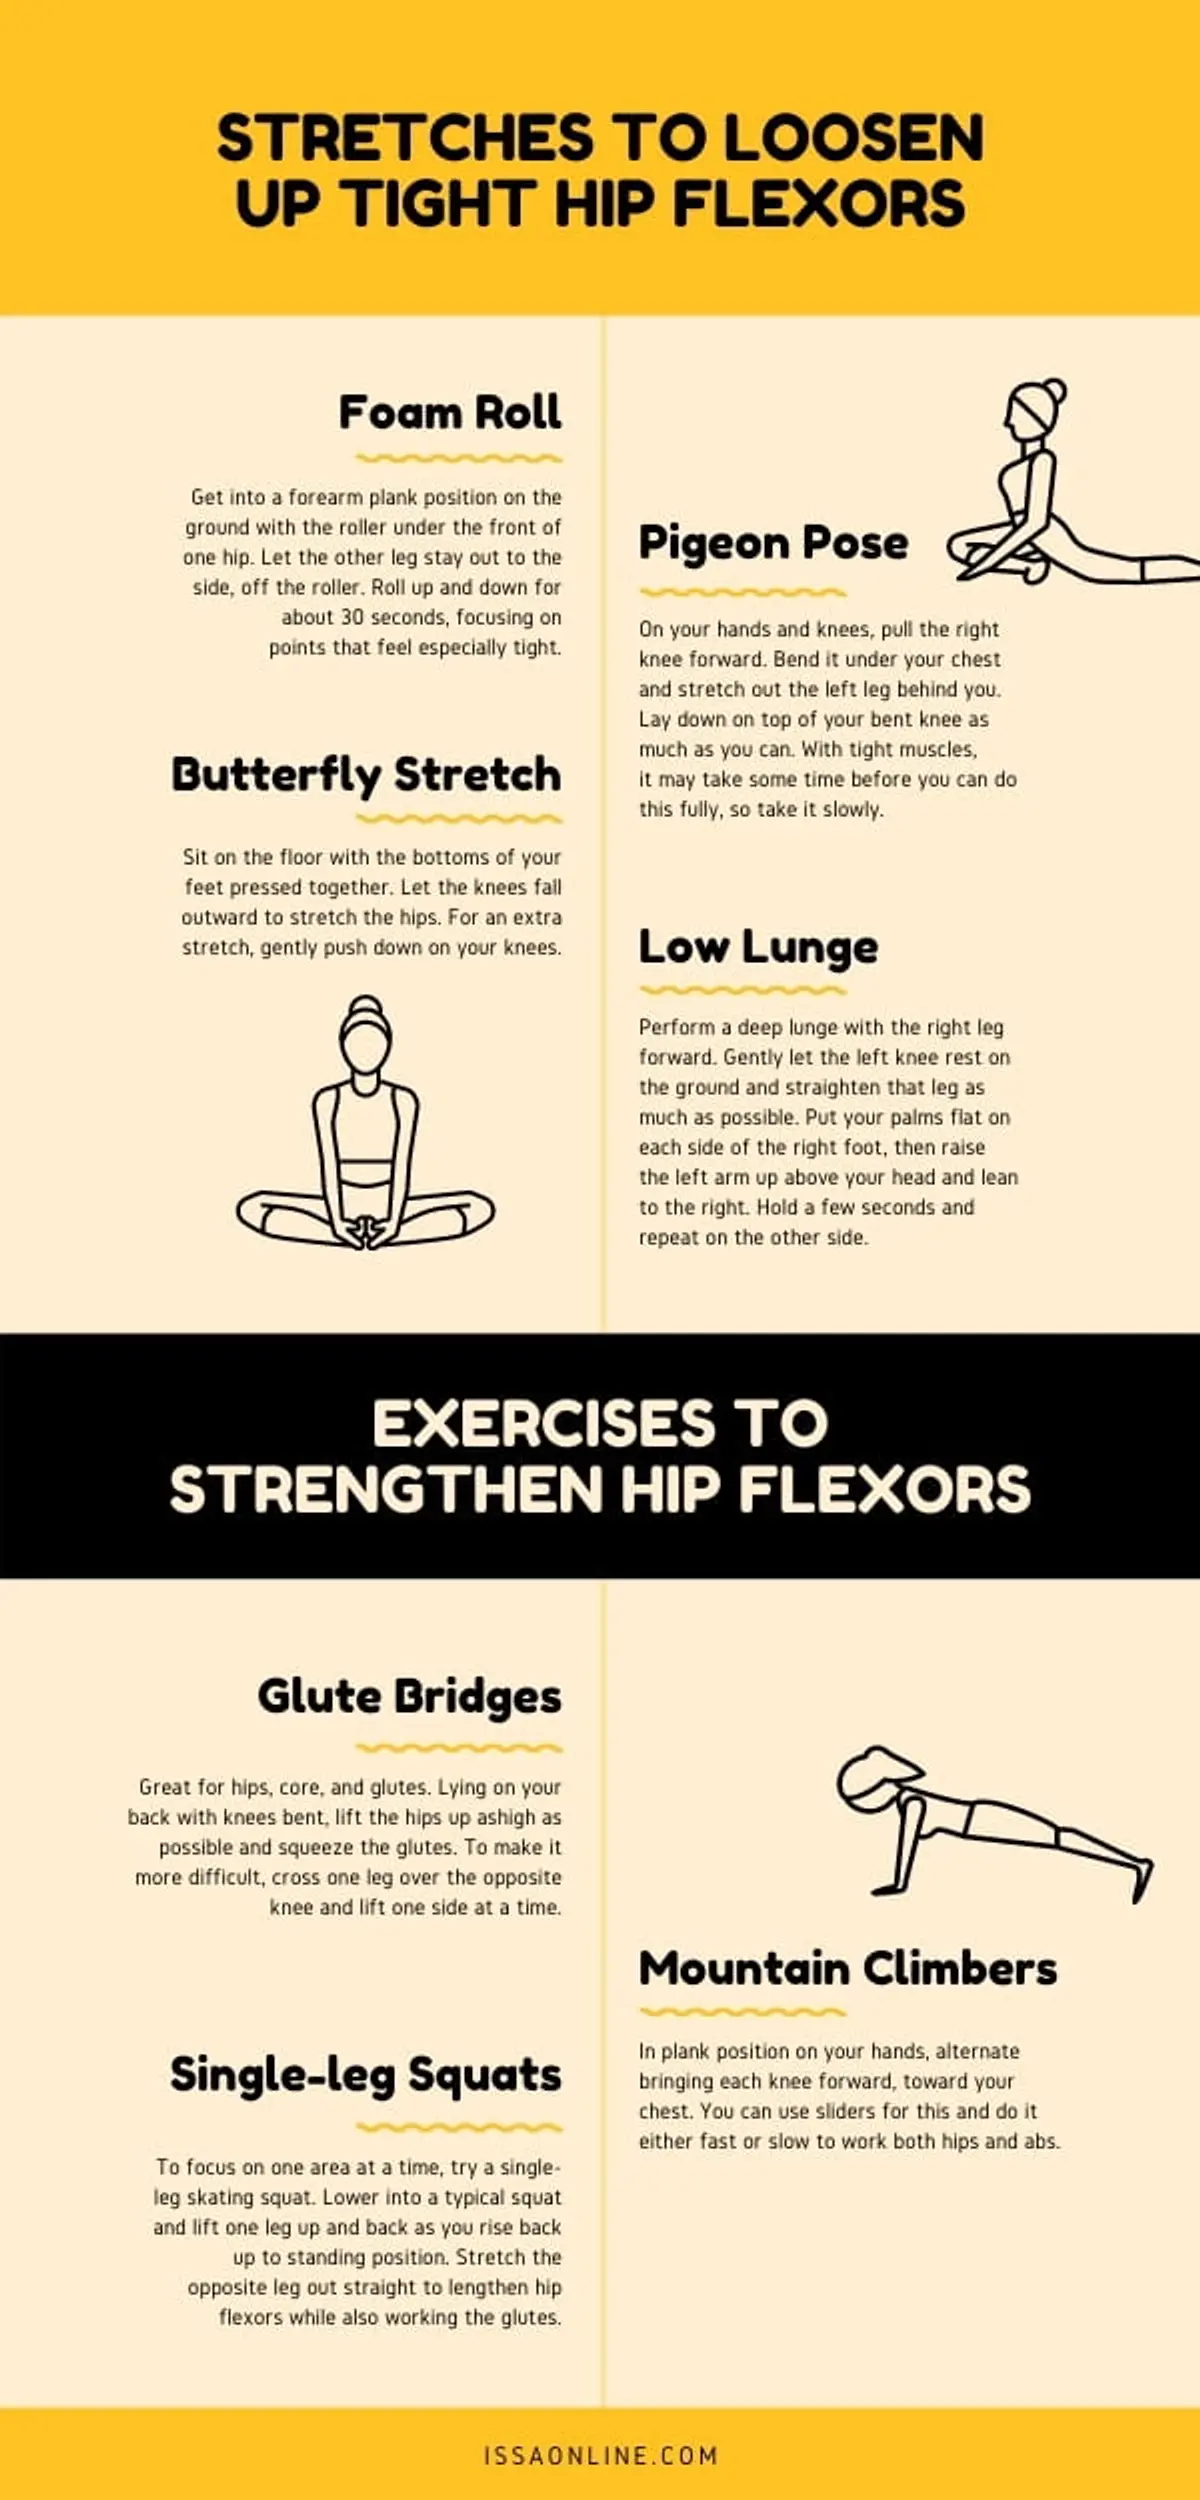 ,ISSA, International Sports Sciences Association, Certified Personal Trainer, ISSAonline, How to Identify and Correct Tight Hip Flexors, Infographic